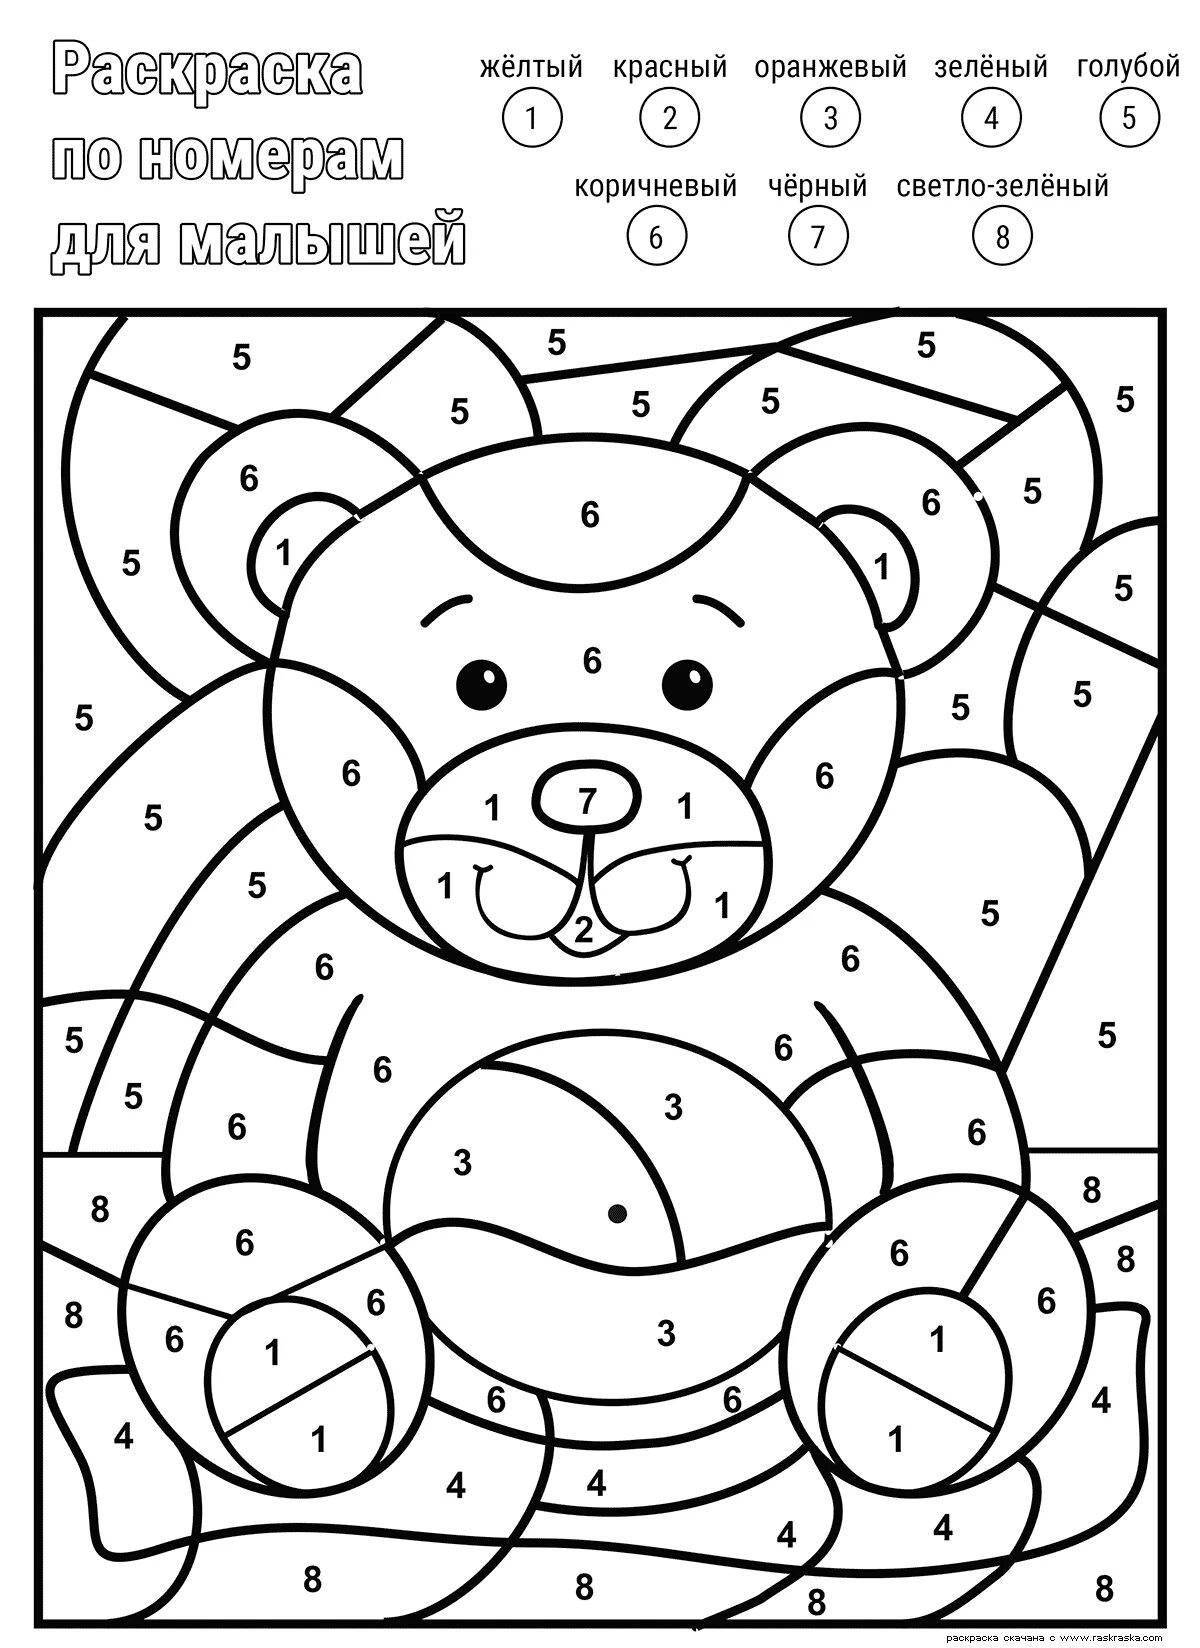 Bright number coloring book for kids